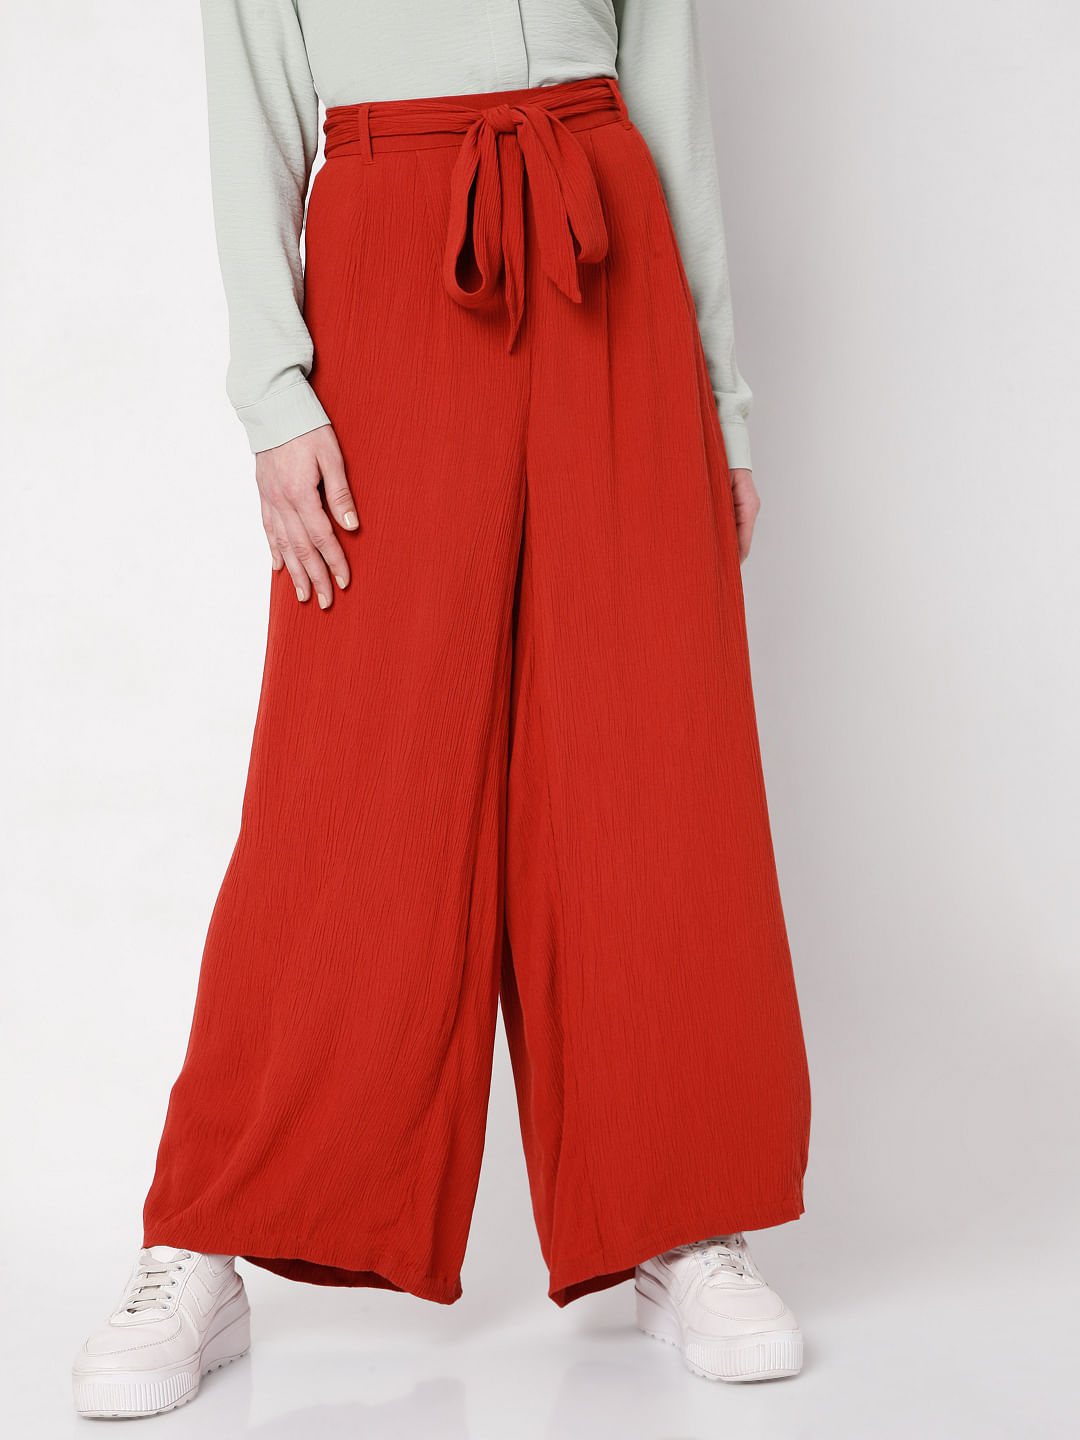 Buy Online Maroon Poly Viscose Pants for Women  Girls at Best Prices in  Biba IndiaBOTTOMW16839SS21